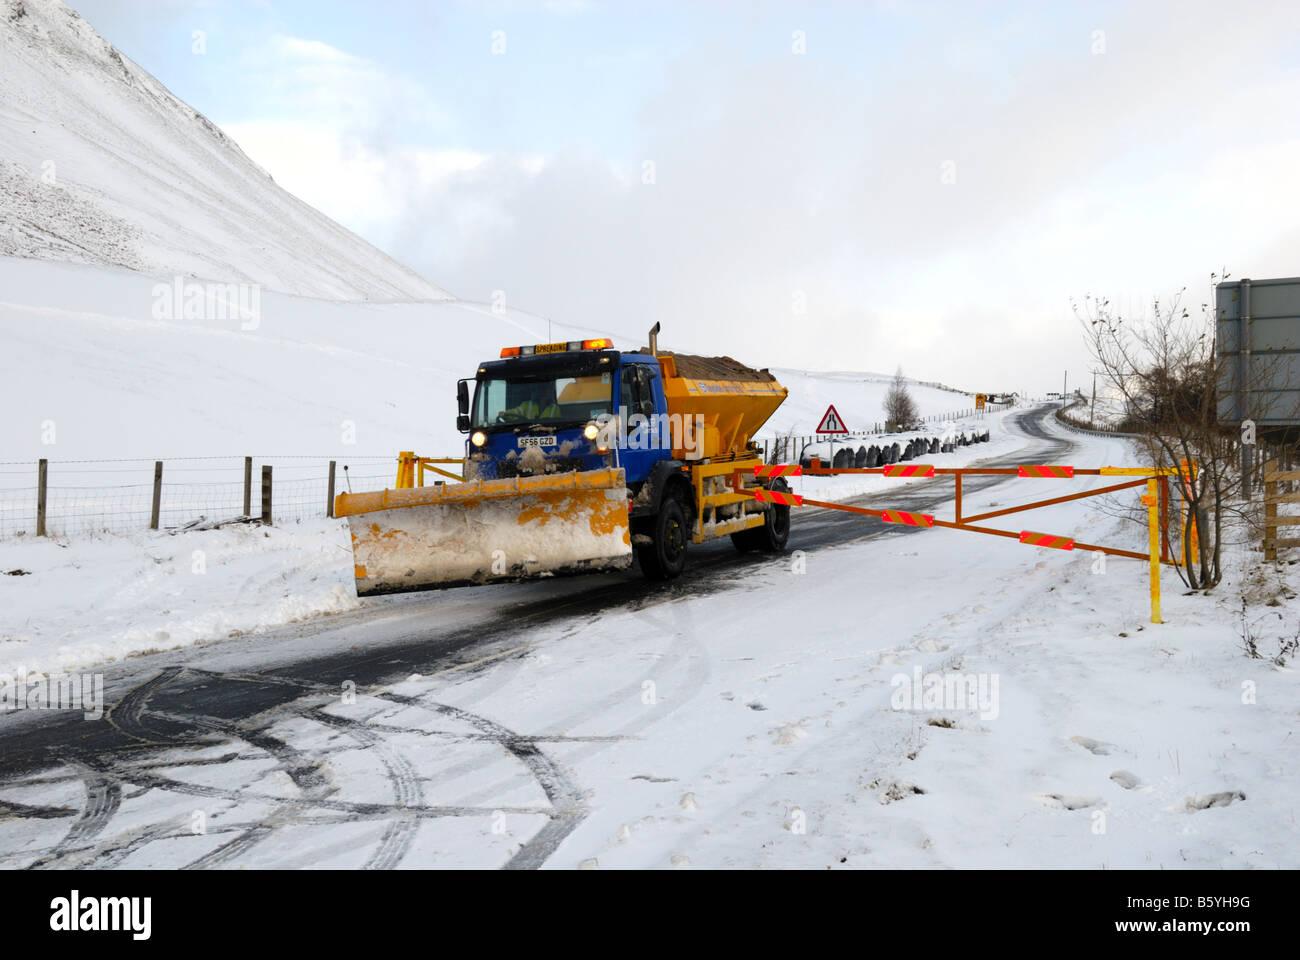 A93 Blairgowrie - Braemar road blocked by snow at the Spittal of Glenshee, Perthshire, Scotland Stock Photo